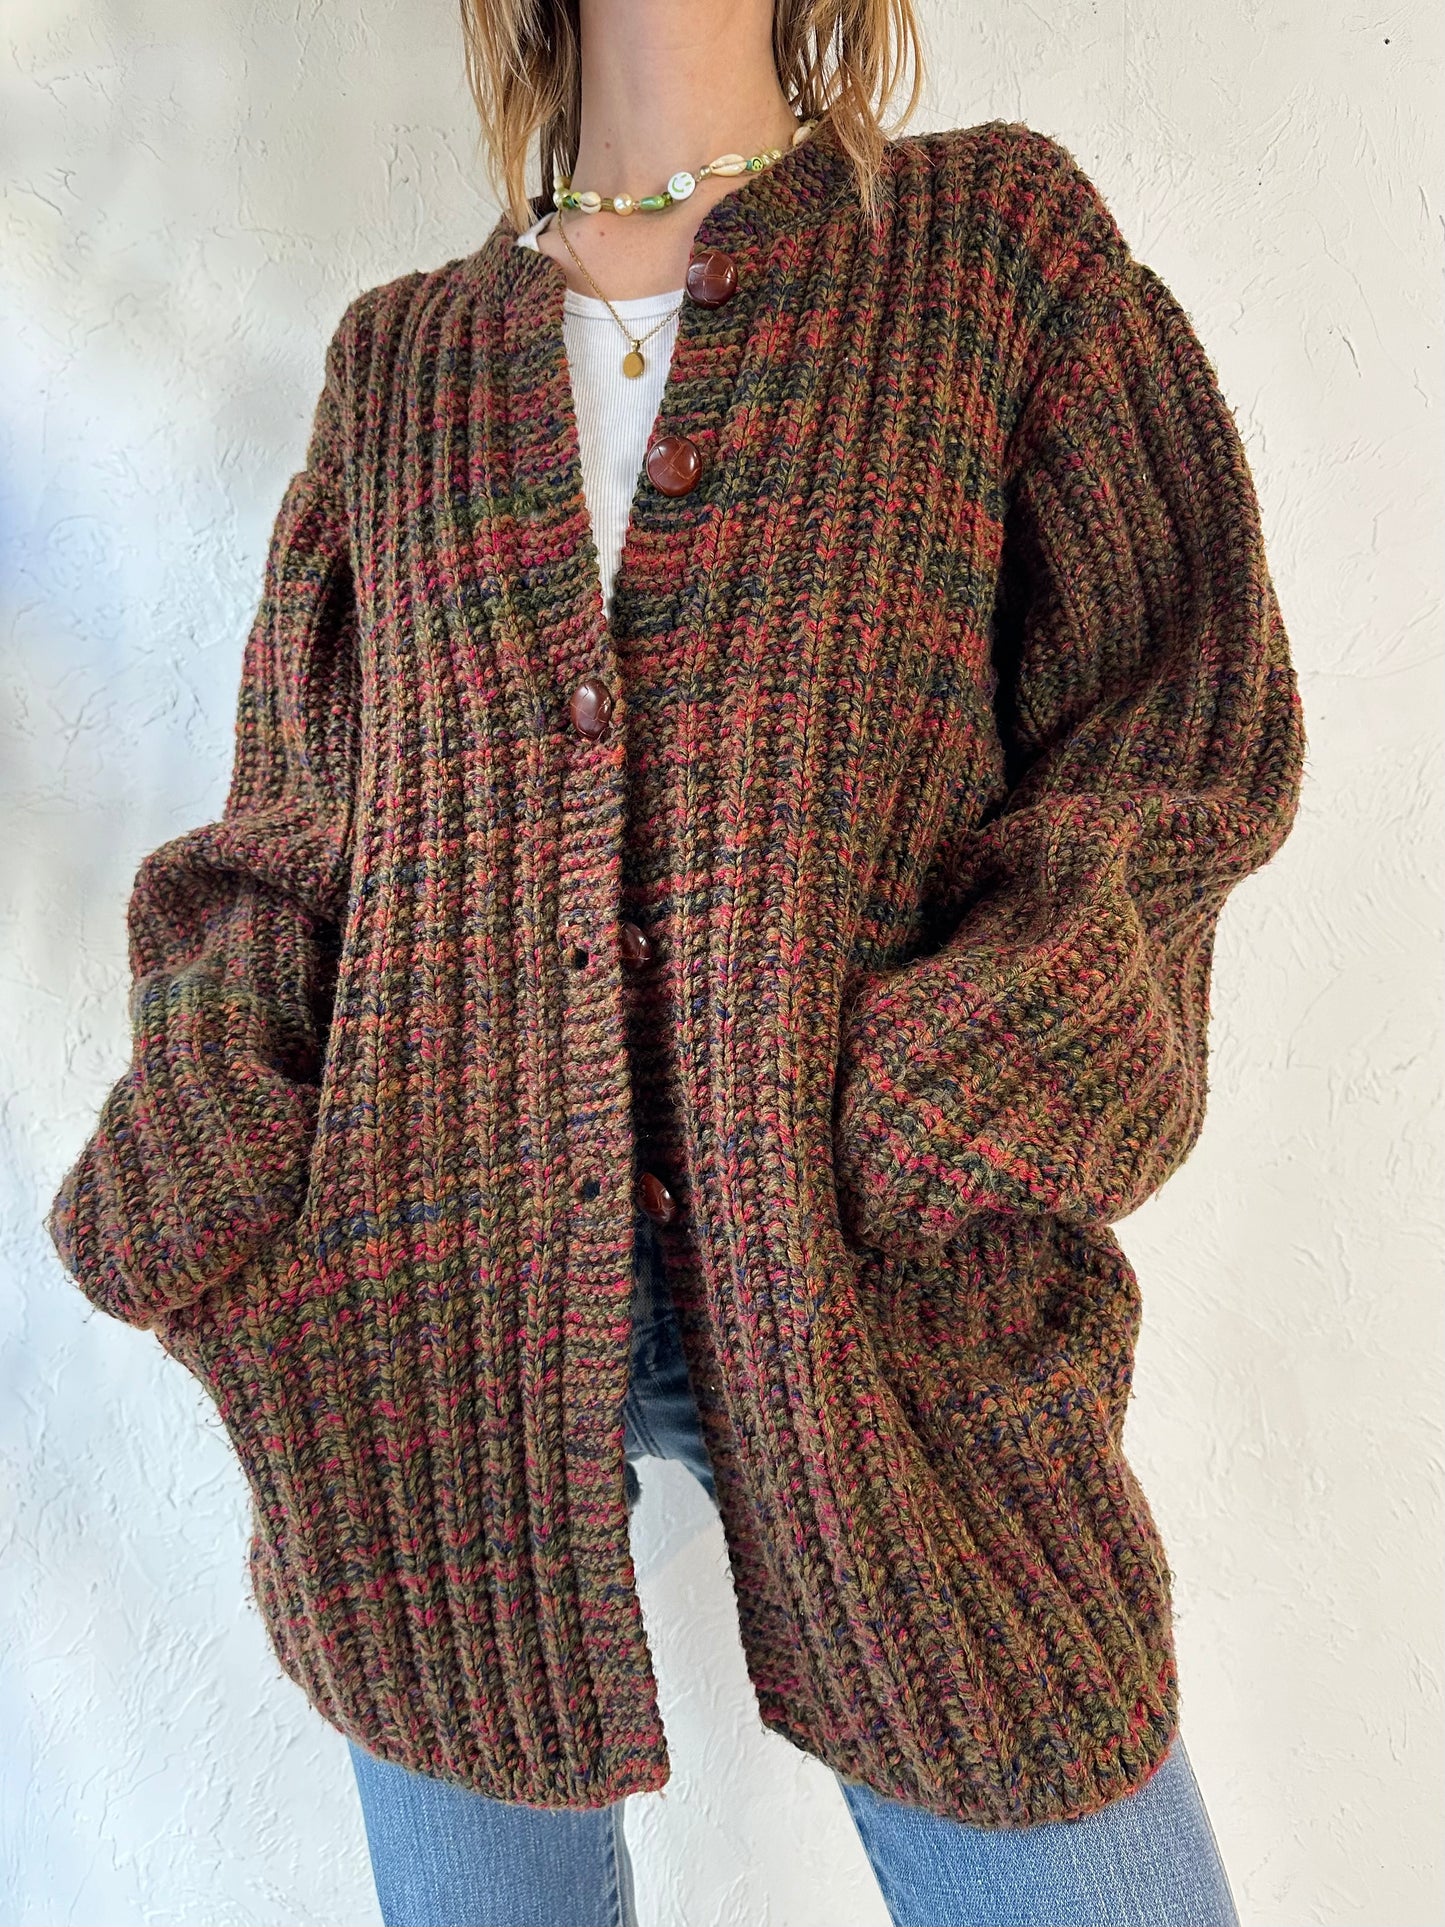 Vintage Hand Knit Thick Cardigan Sweater / Large